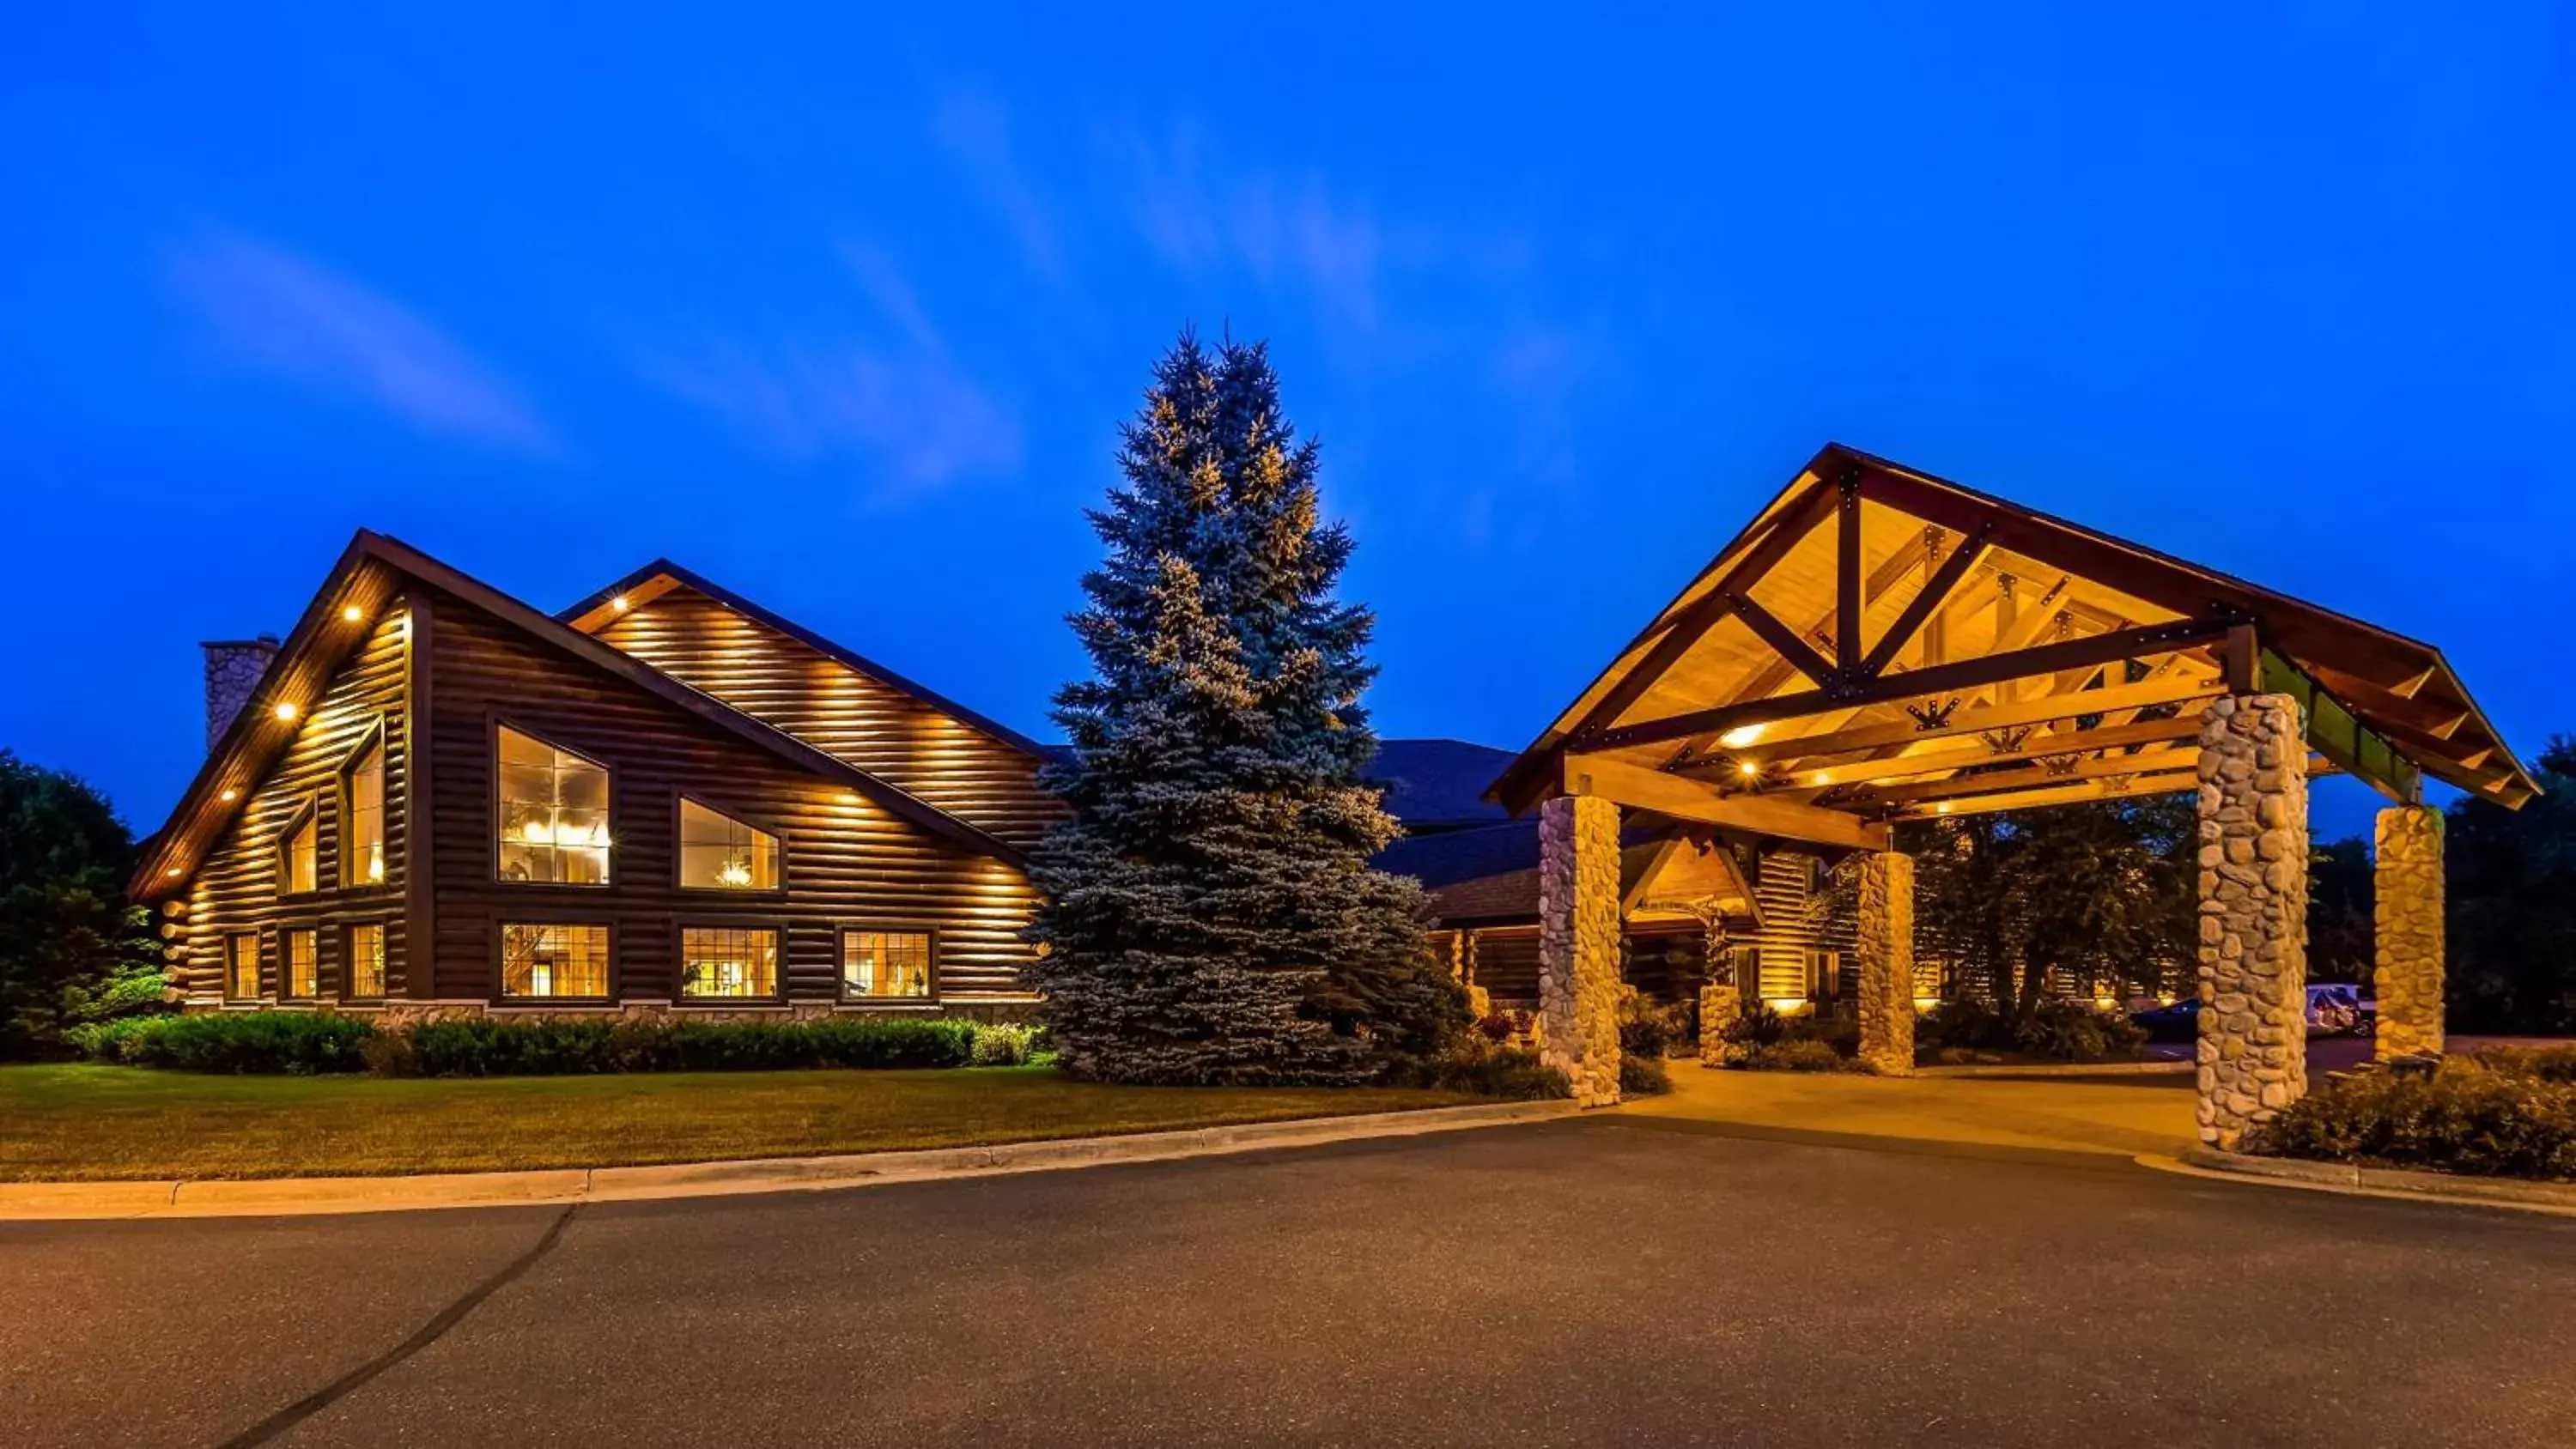 Property Building in Best Western Northwoods Lodge